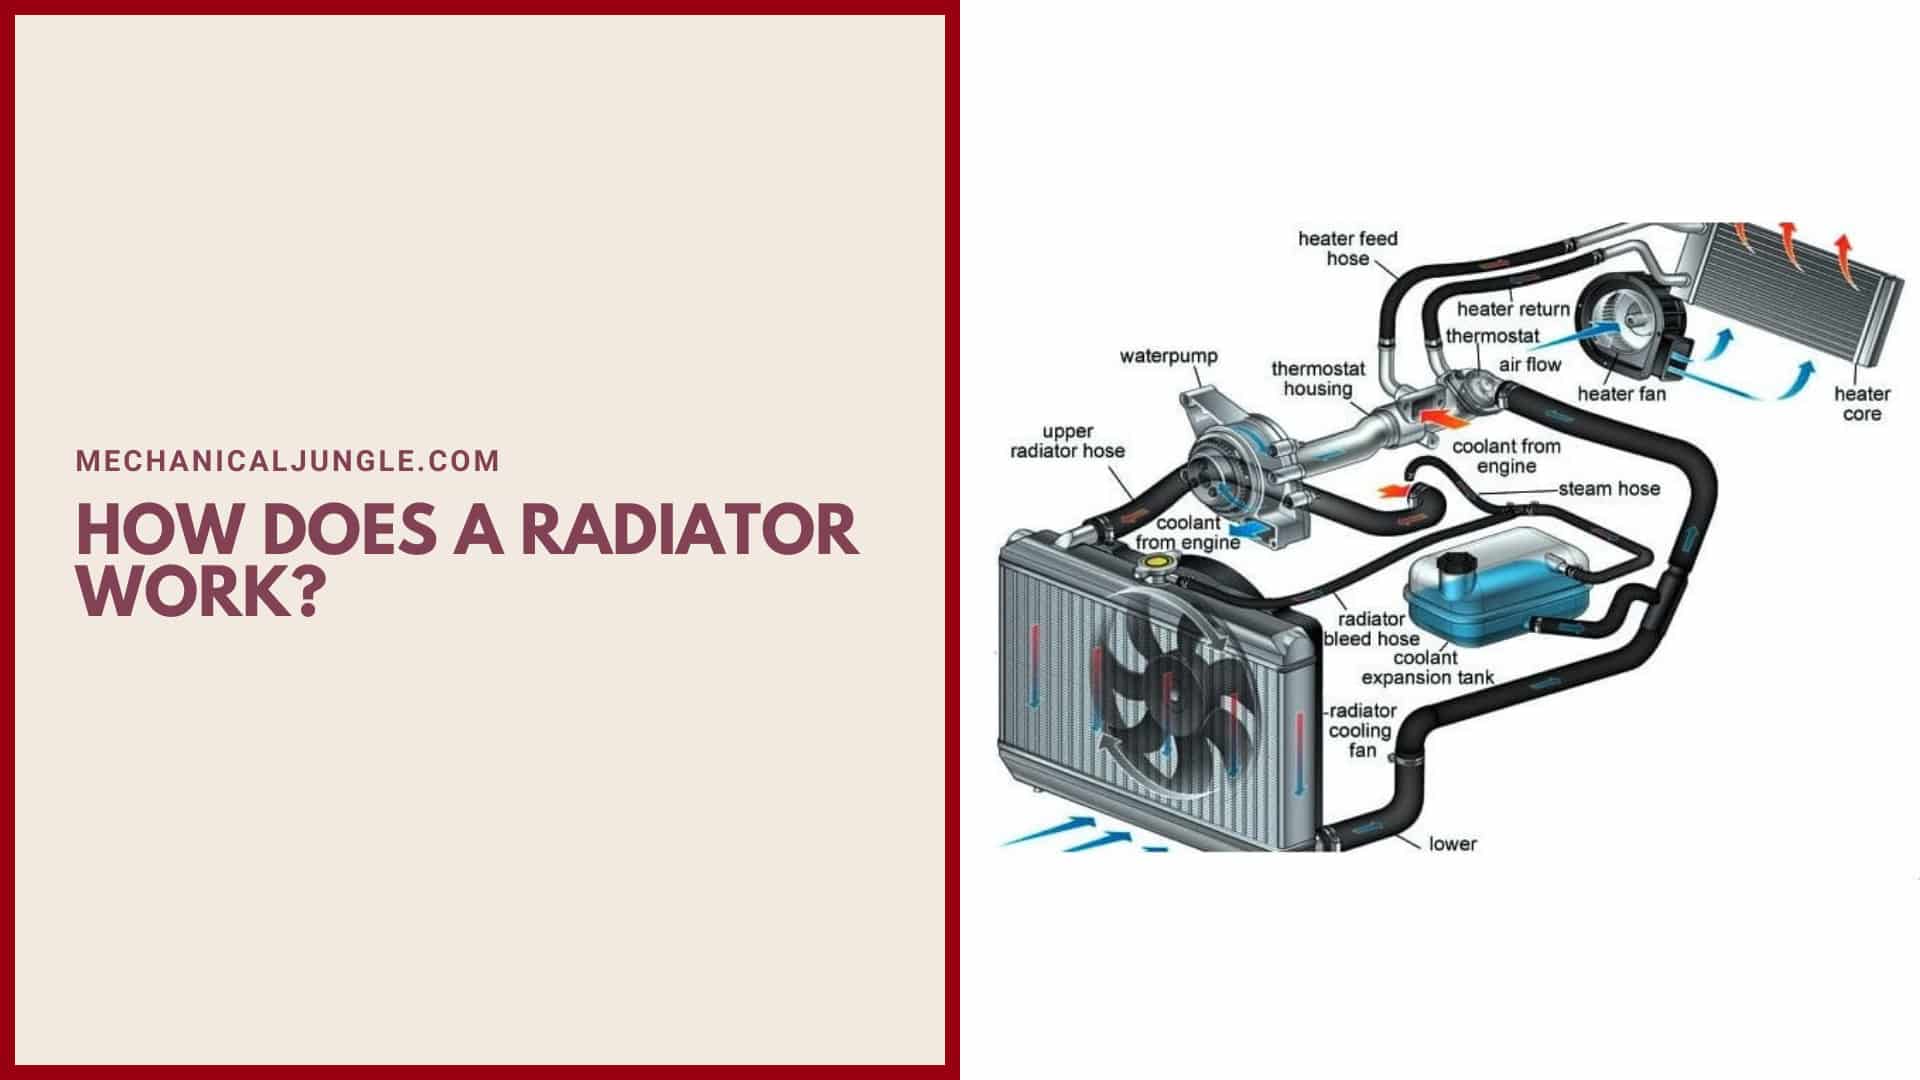 How Does a Radiator Work?